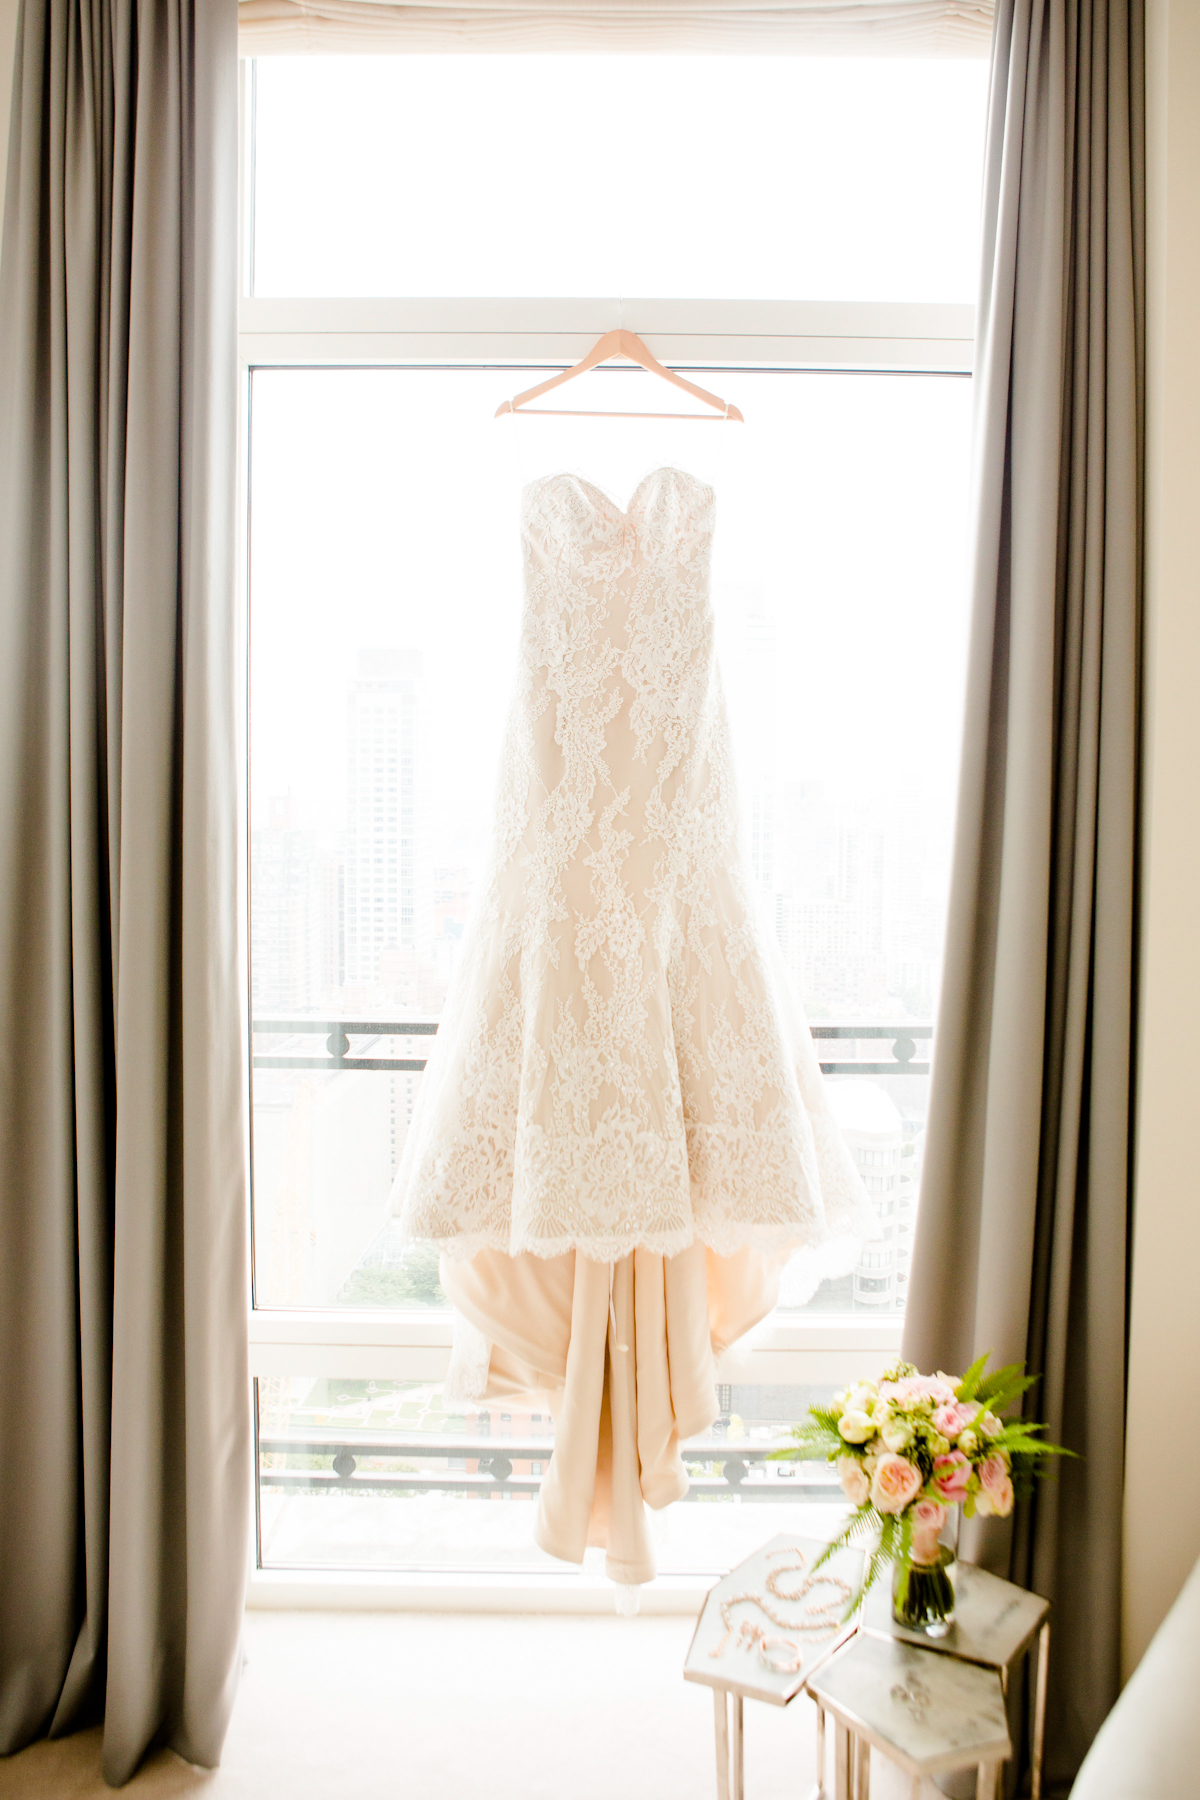 Rainbow Room Wedding, Ang Weddings and Events, Dave Robbins Photography, Kleinfeld Bridal gown